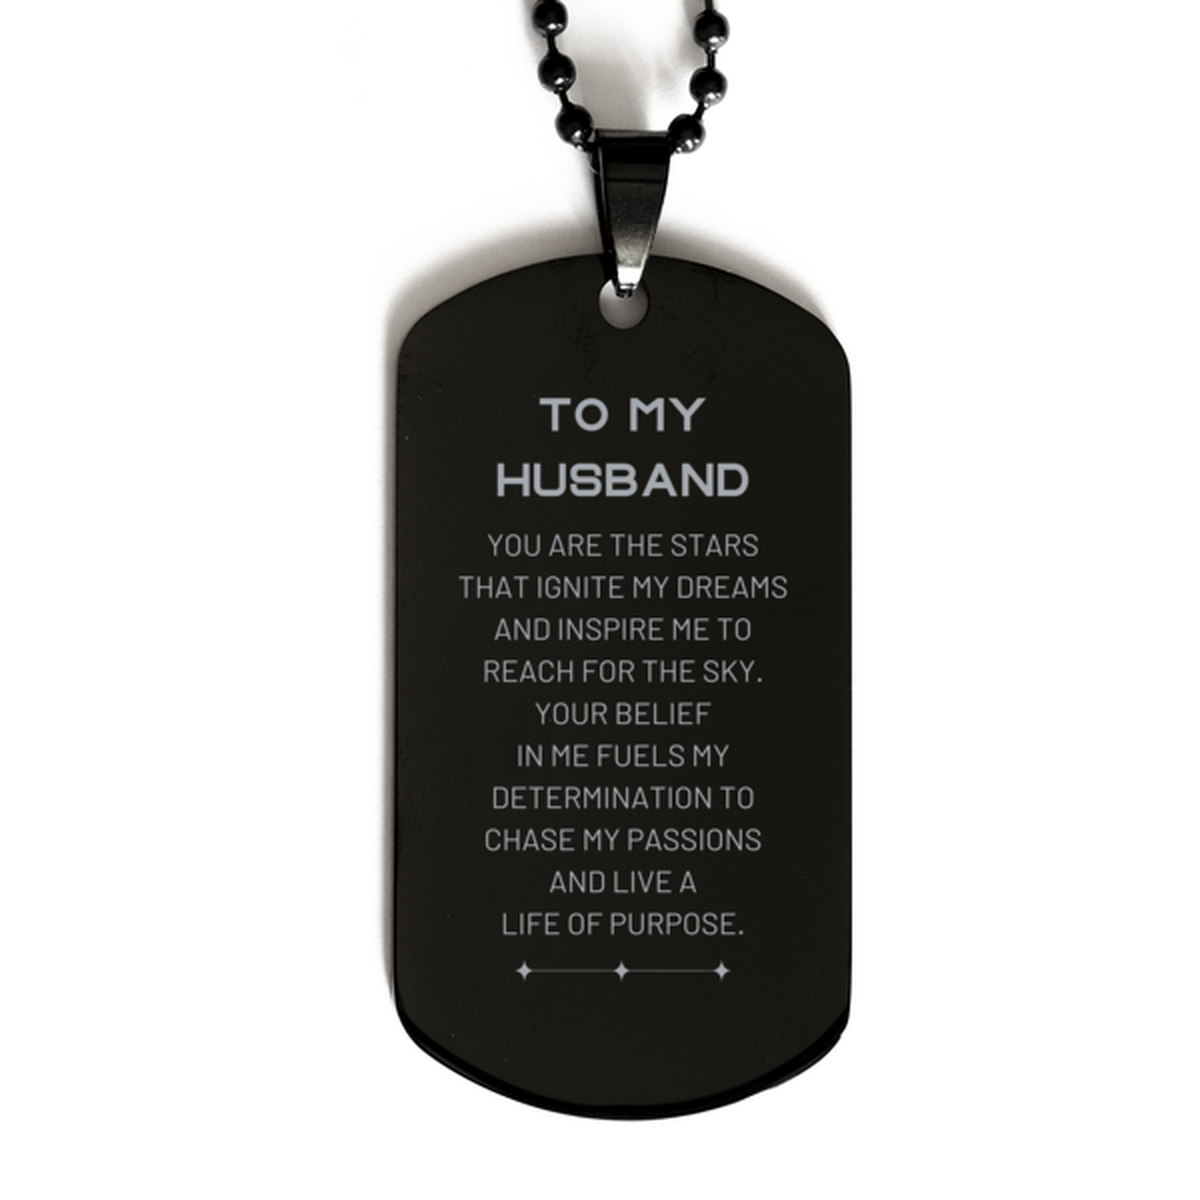 To My Husband Black Dog Tag, You are the stars that ignite my dreams and inspire me to reach for the sky, Birthday Unique Gifts For Husband, Thank You Gifts For Husband